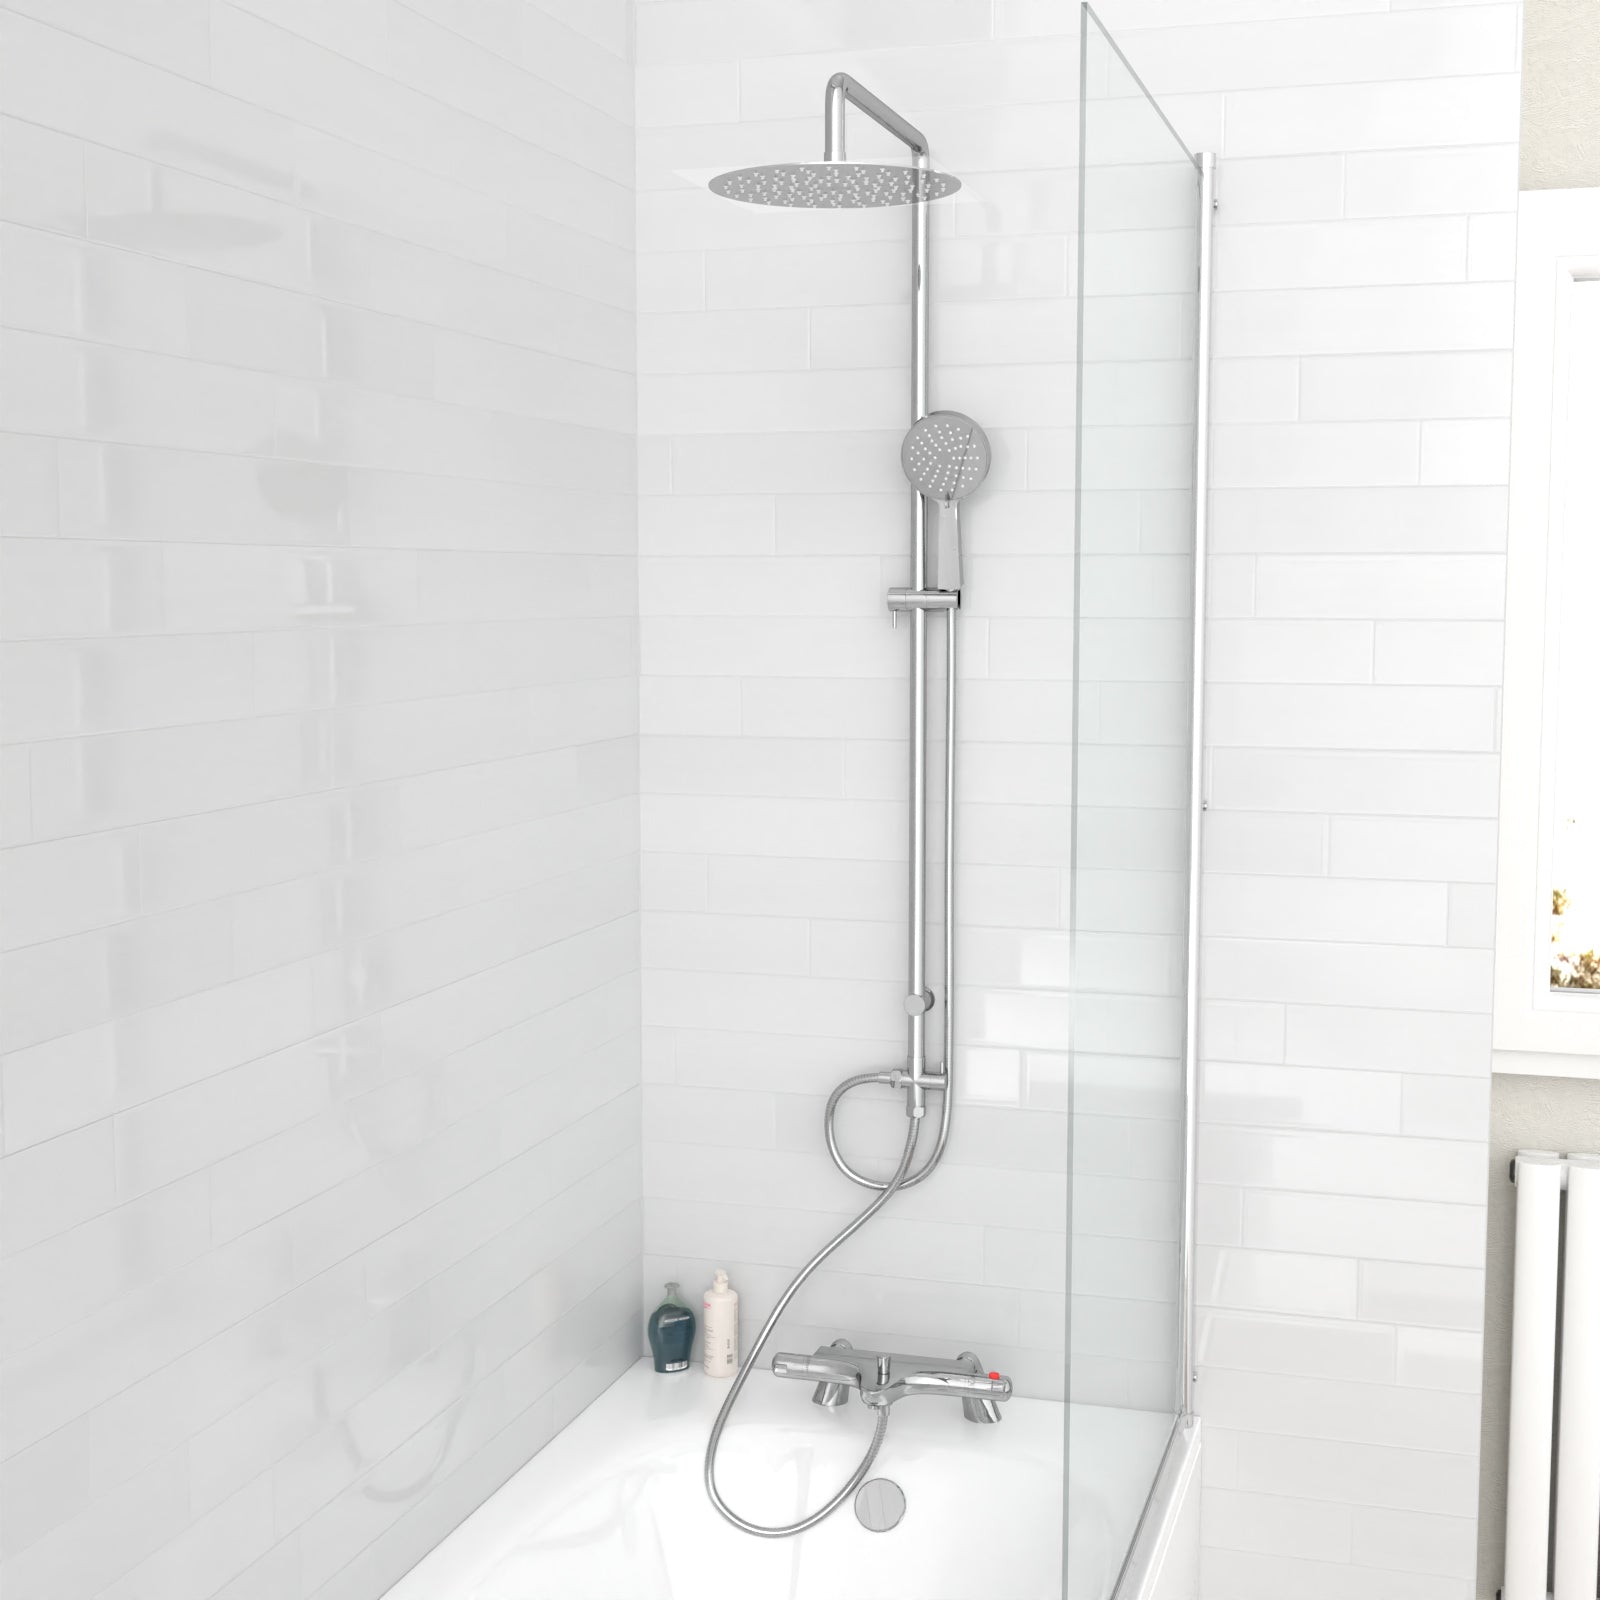 Tasley Exposed Round Shower, Safety Button Thermostatic Mixer Tap, Handset & Riser Rail Kit